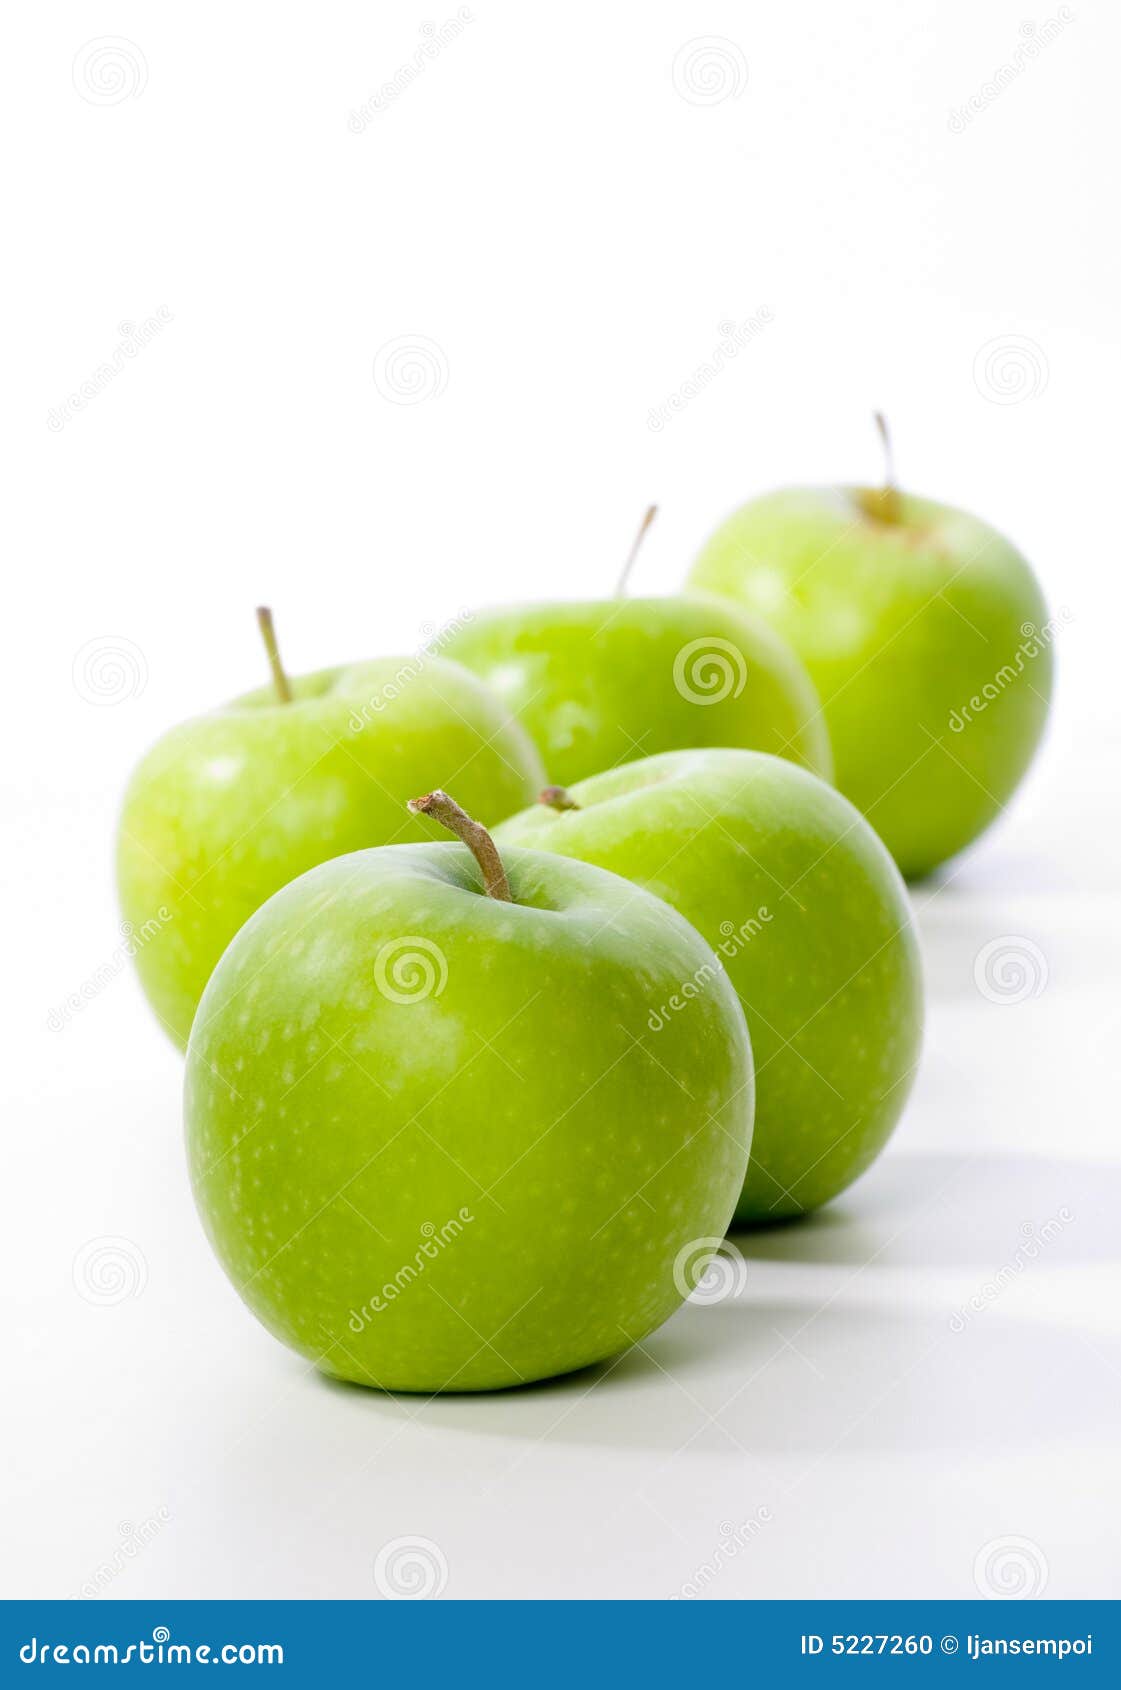 Green apple stock photo. Image of concept, apple, fruit - 5227260